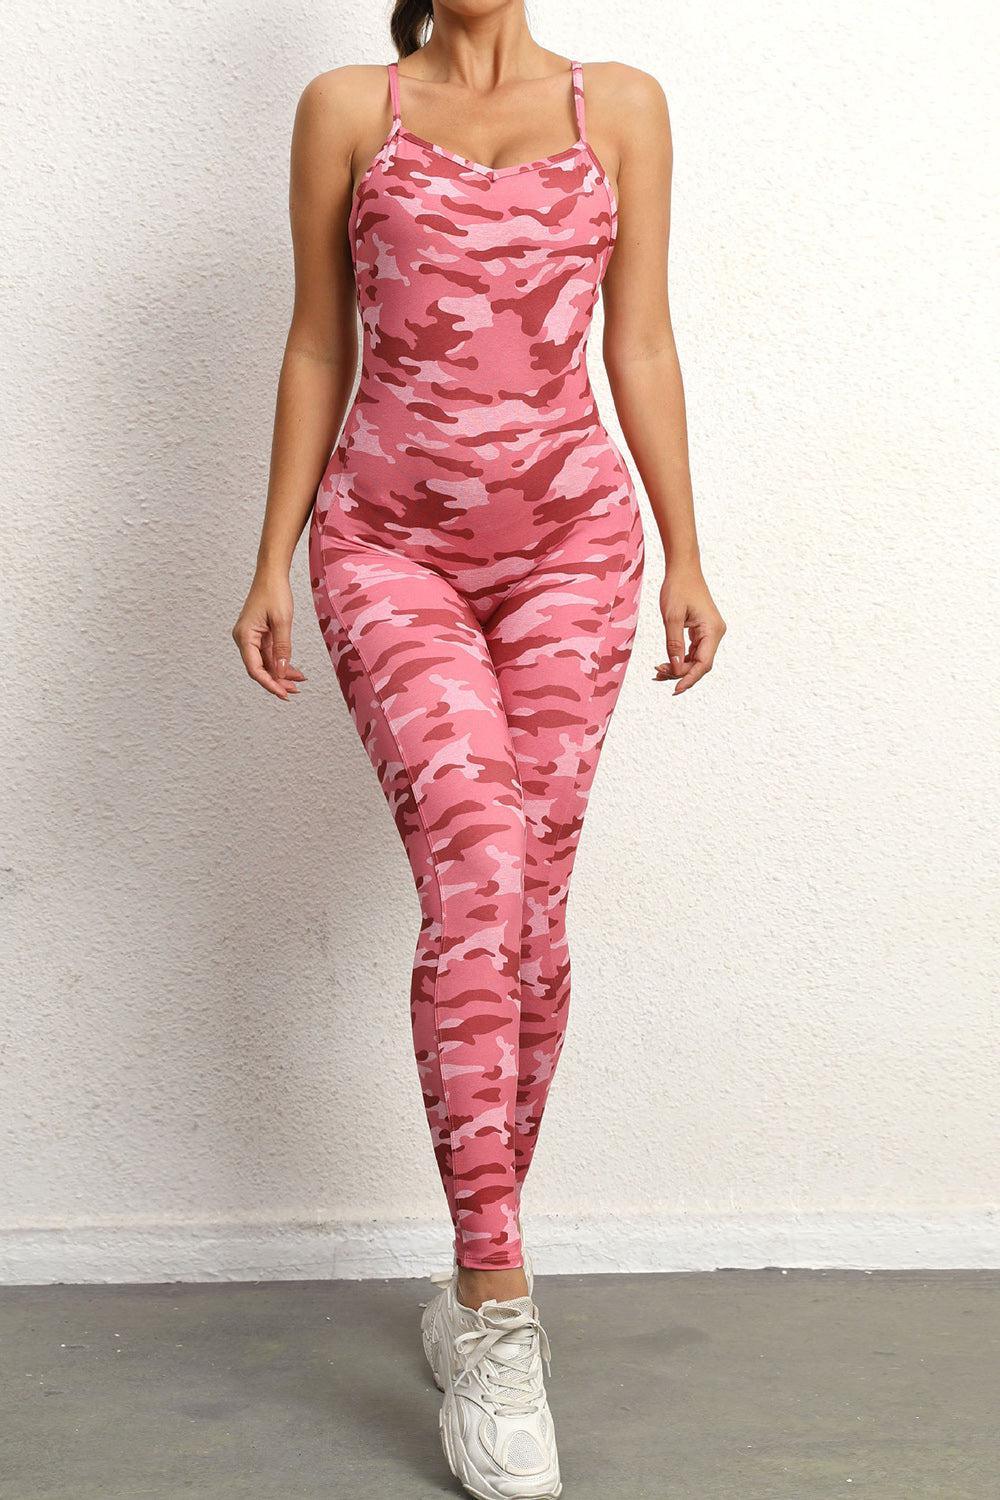 a woman in a pink camo print jumpsuit